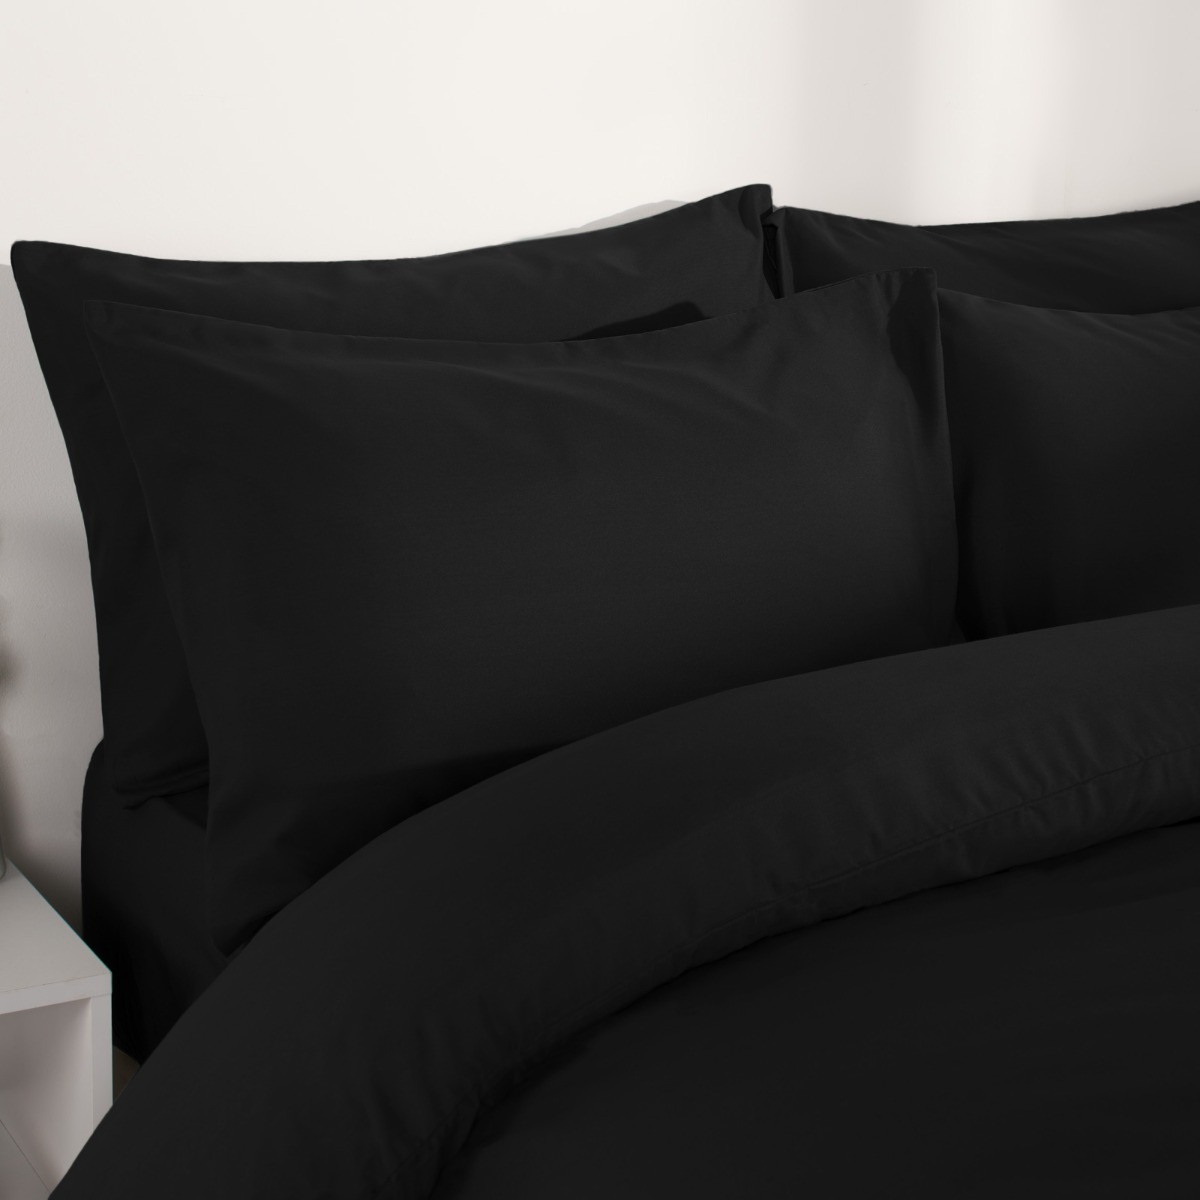 Brentfords 2 Pack Plain Dyed Housewife Pillowcases - Black>